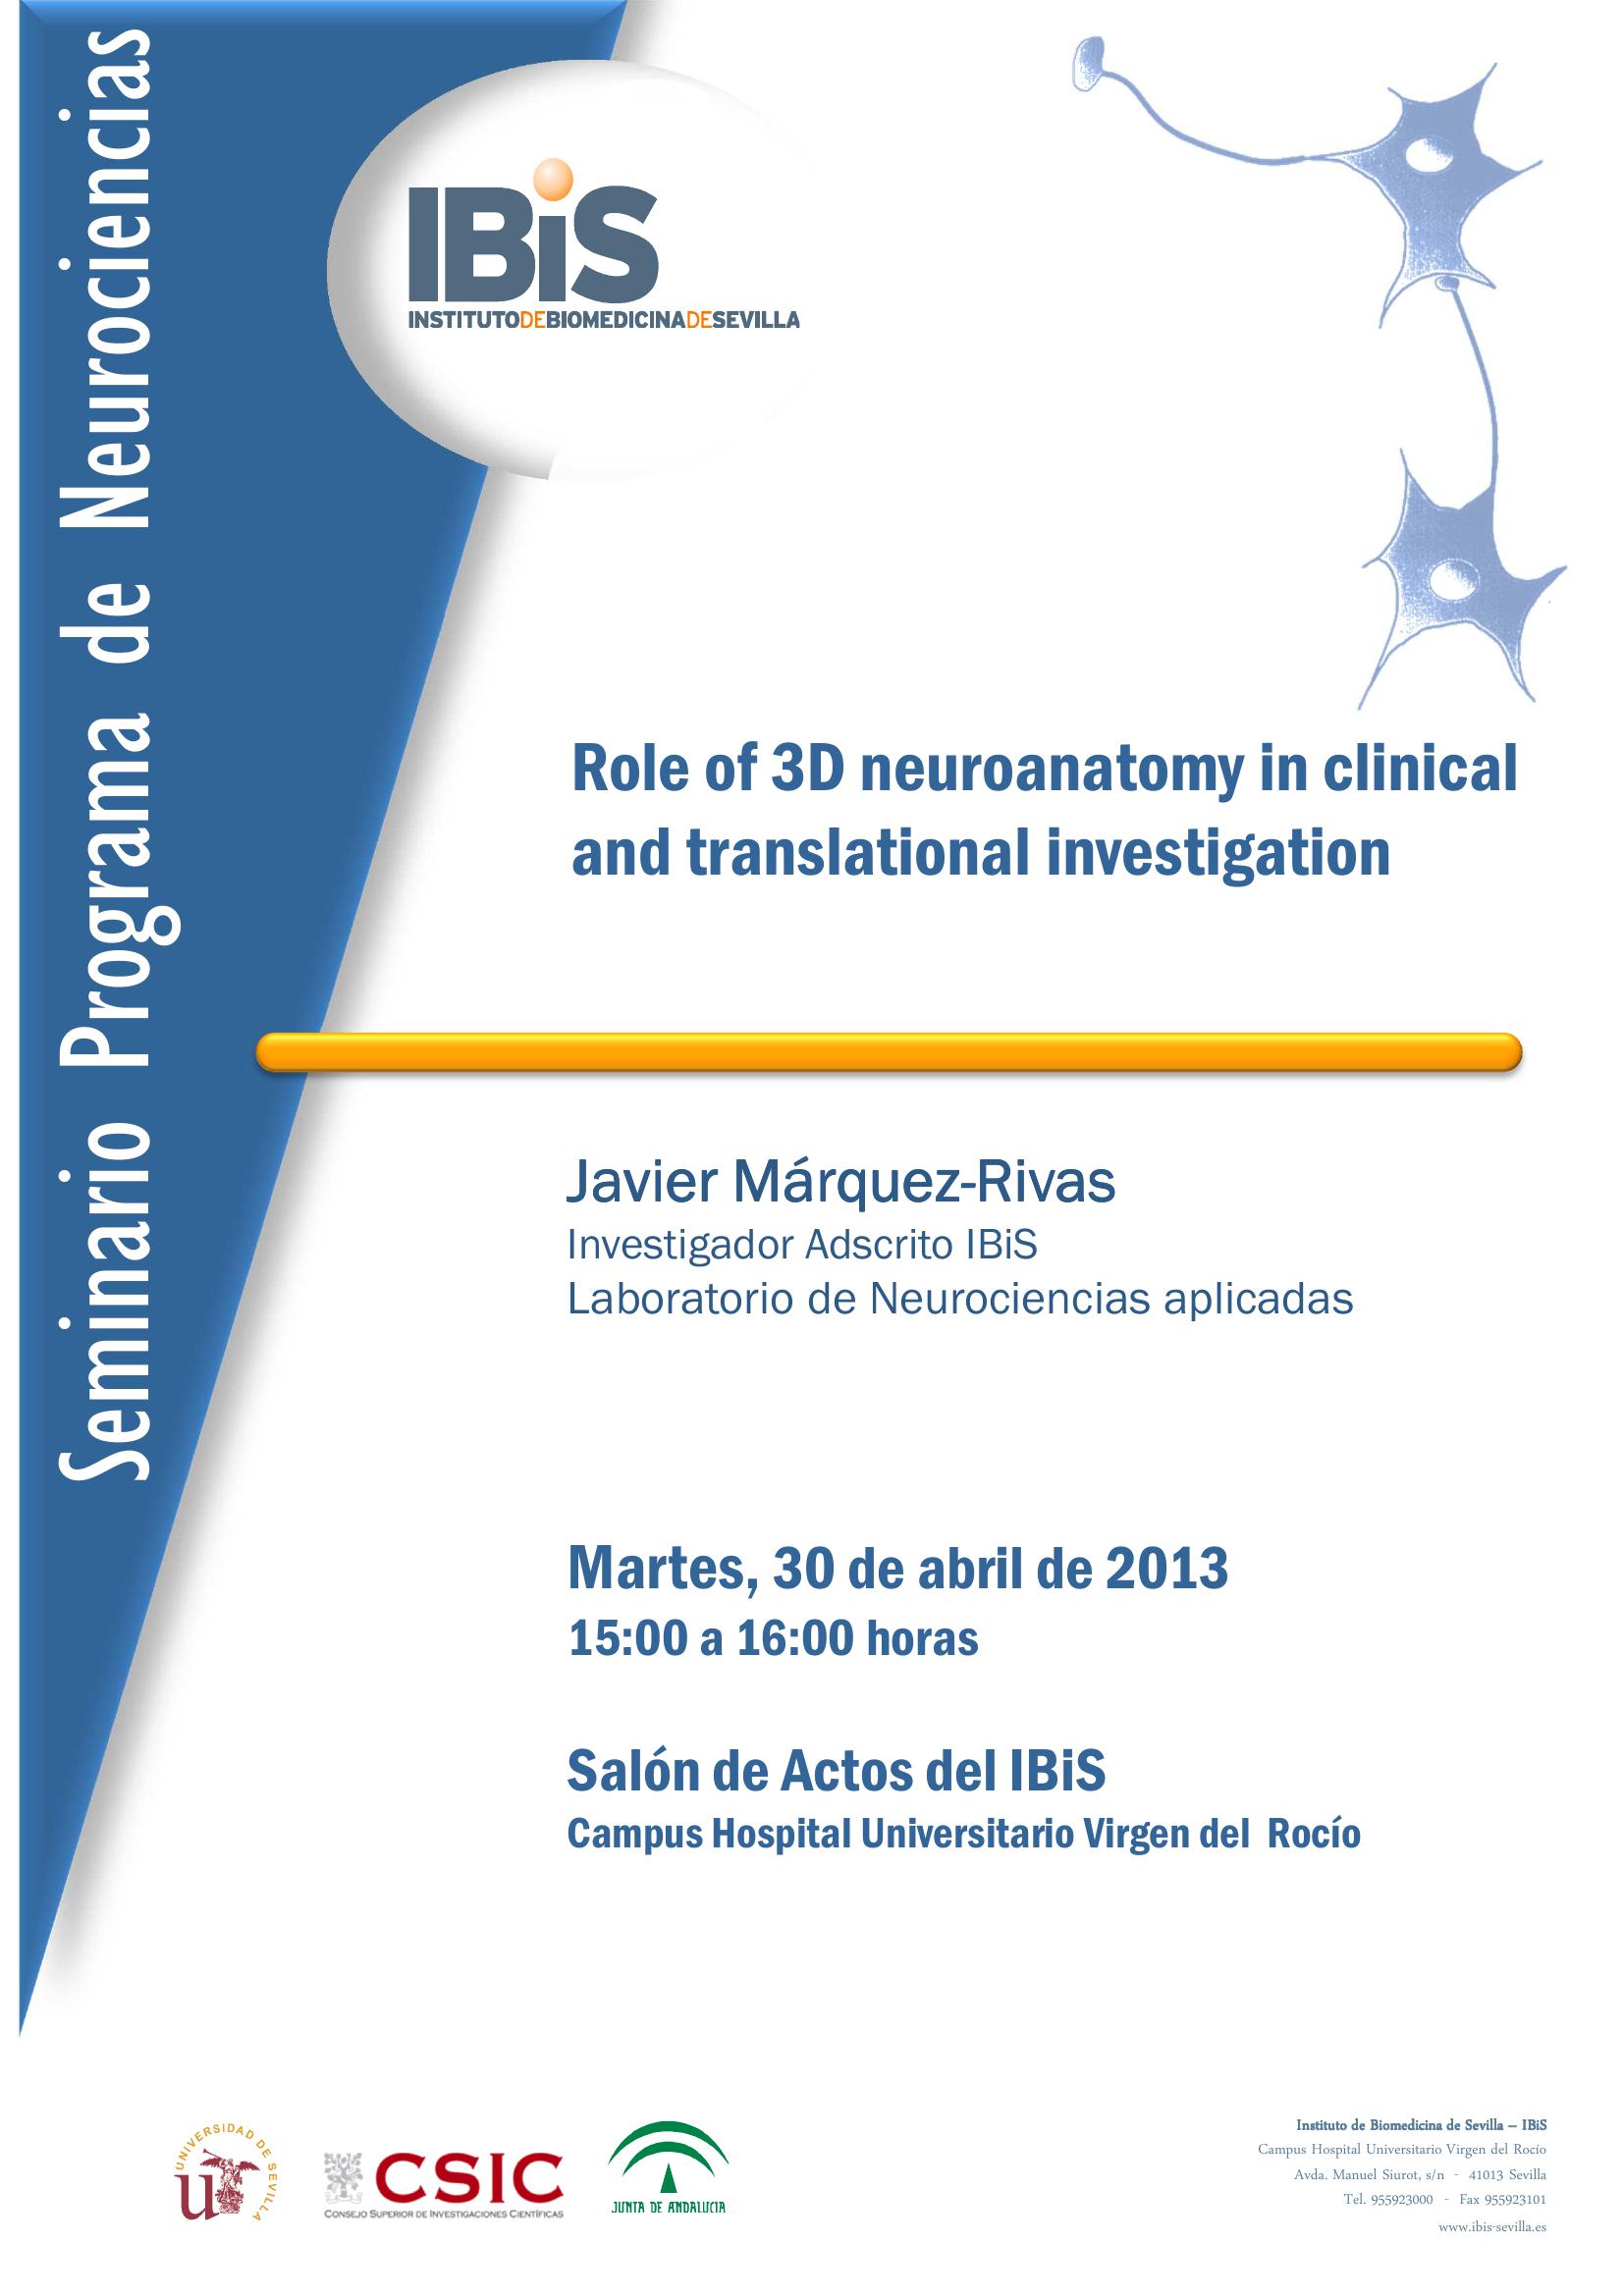 Poster: Role of 3D neuroanatomy in clinical and translational investigation